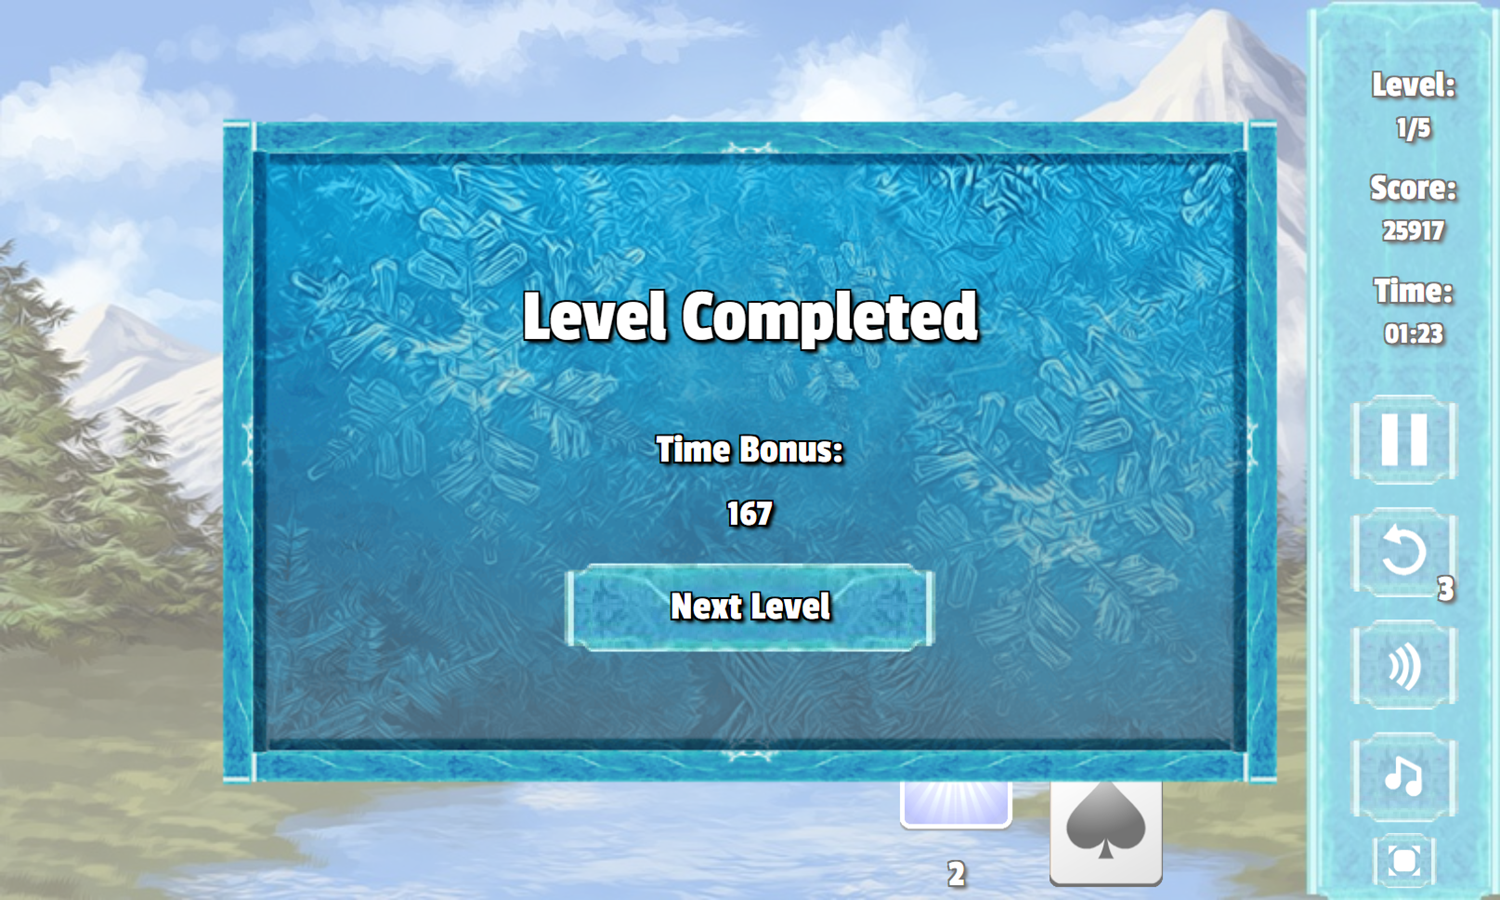 Snowy Peaks Solitaire Game Level Completed Screenshot.